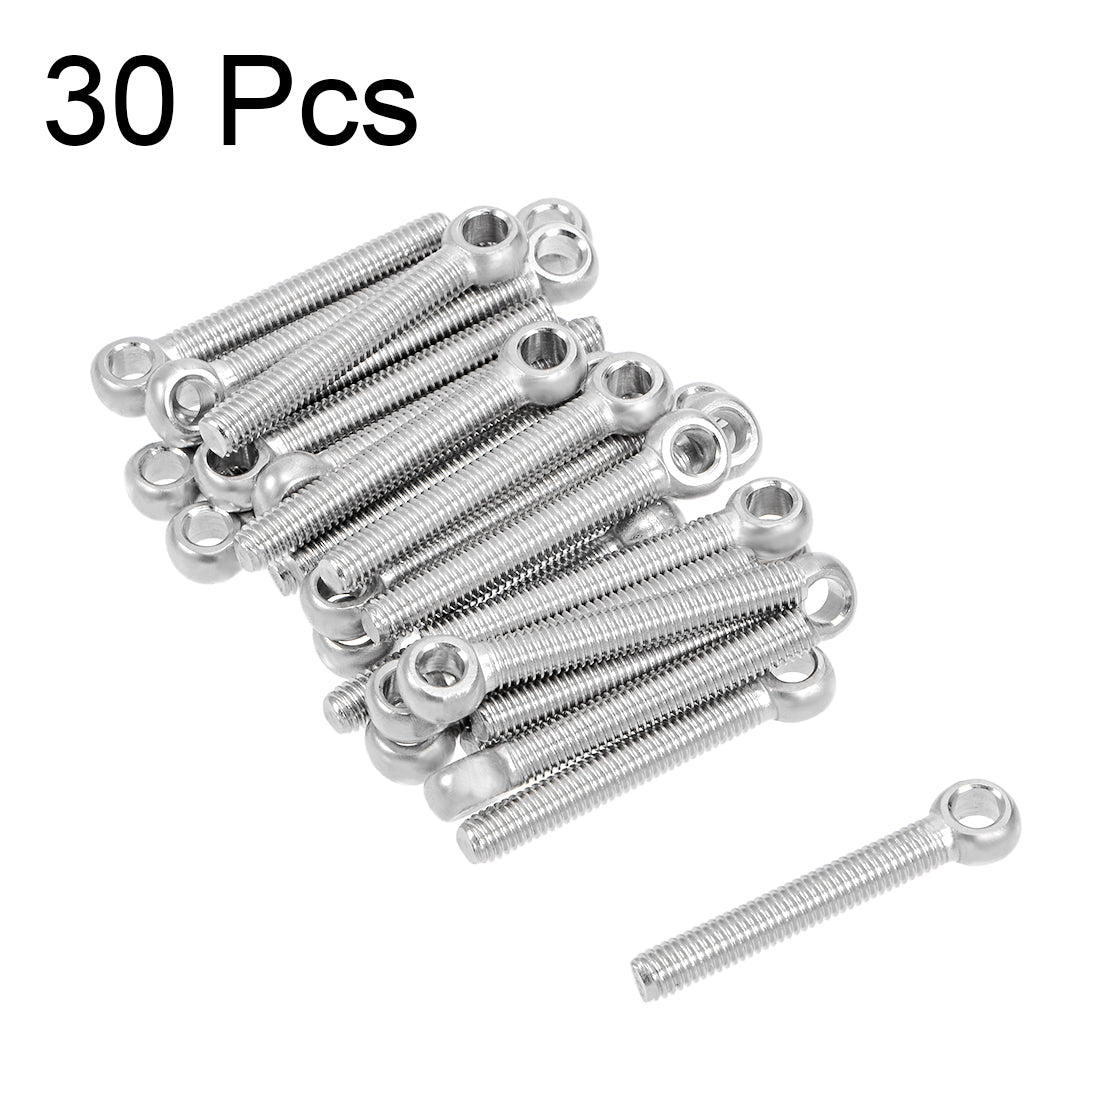 uxcell Uxcell M5 x 35mm 304 Stainless Steel Machine Shoulder Lift Eye Bolt Rigging 30pcs